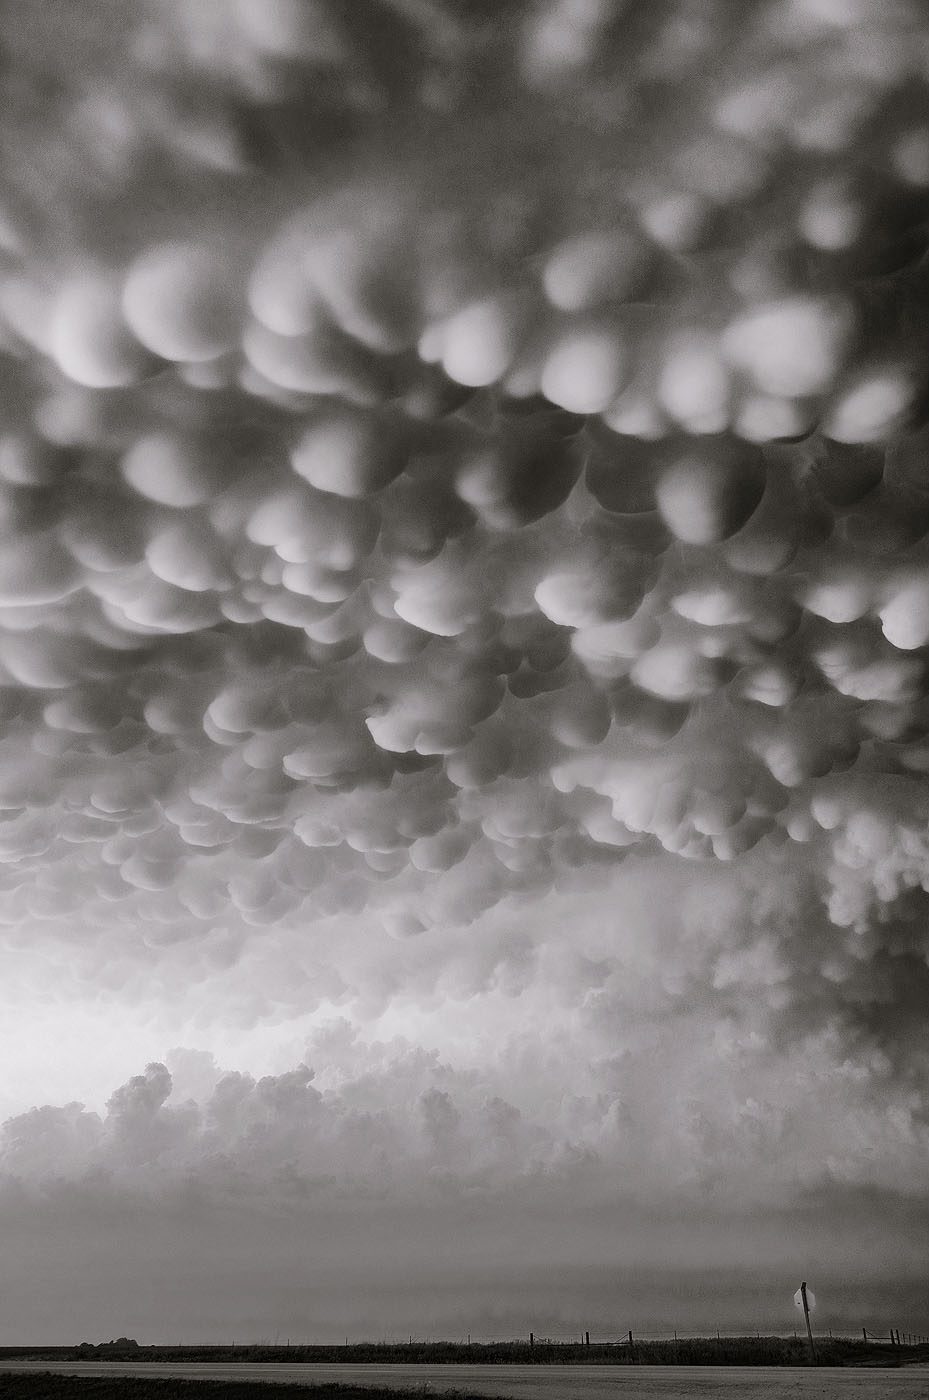 mammatus clouds rendered in black and white